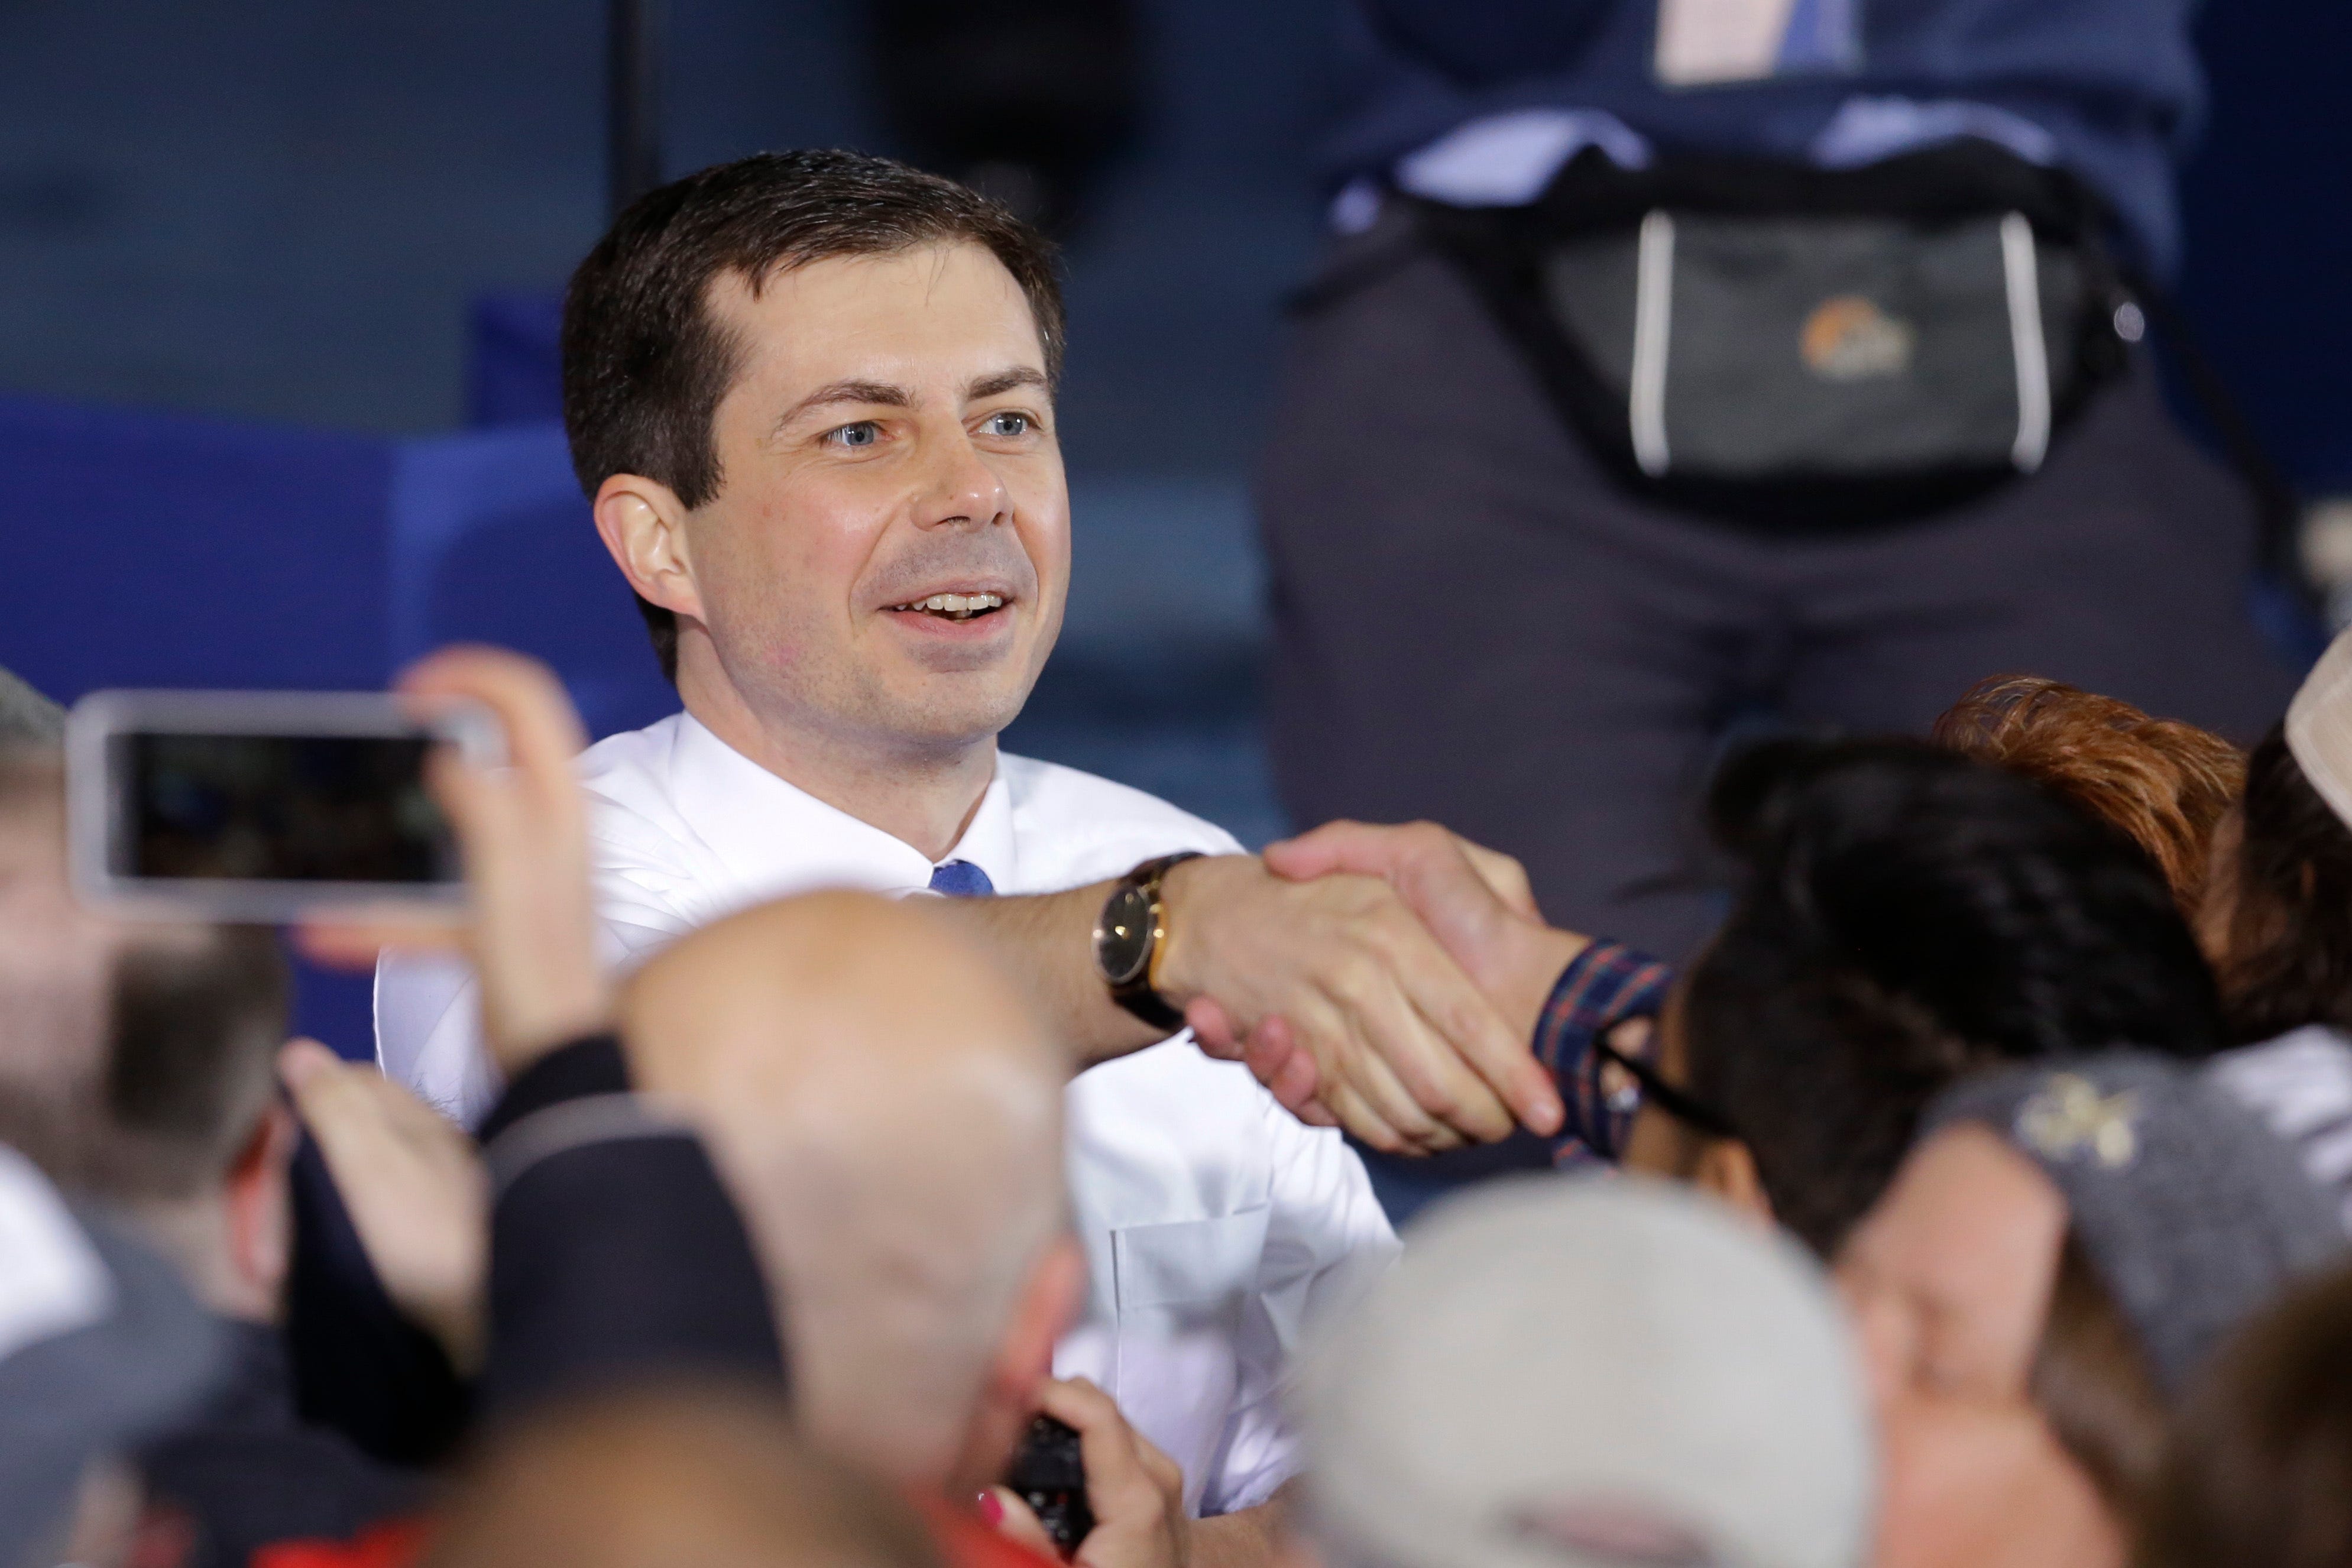 A 21-year-old student at Ferris State University in Big Rapids said accusations made in his name against Pete Buttigieg, seen here campaigning on April 14, are false and he did not authorize them.